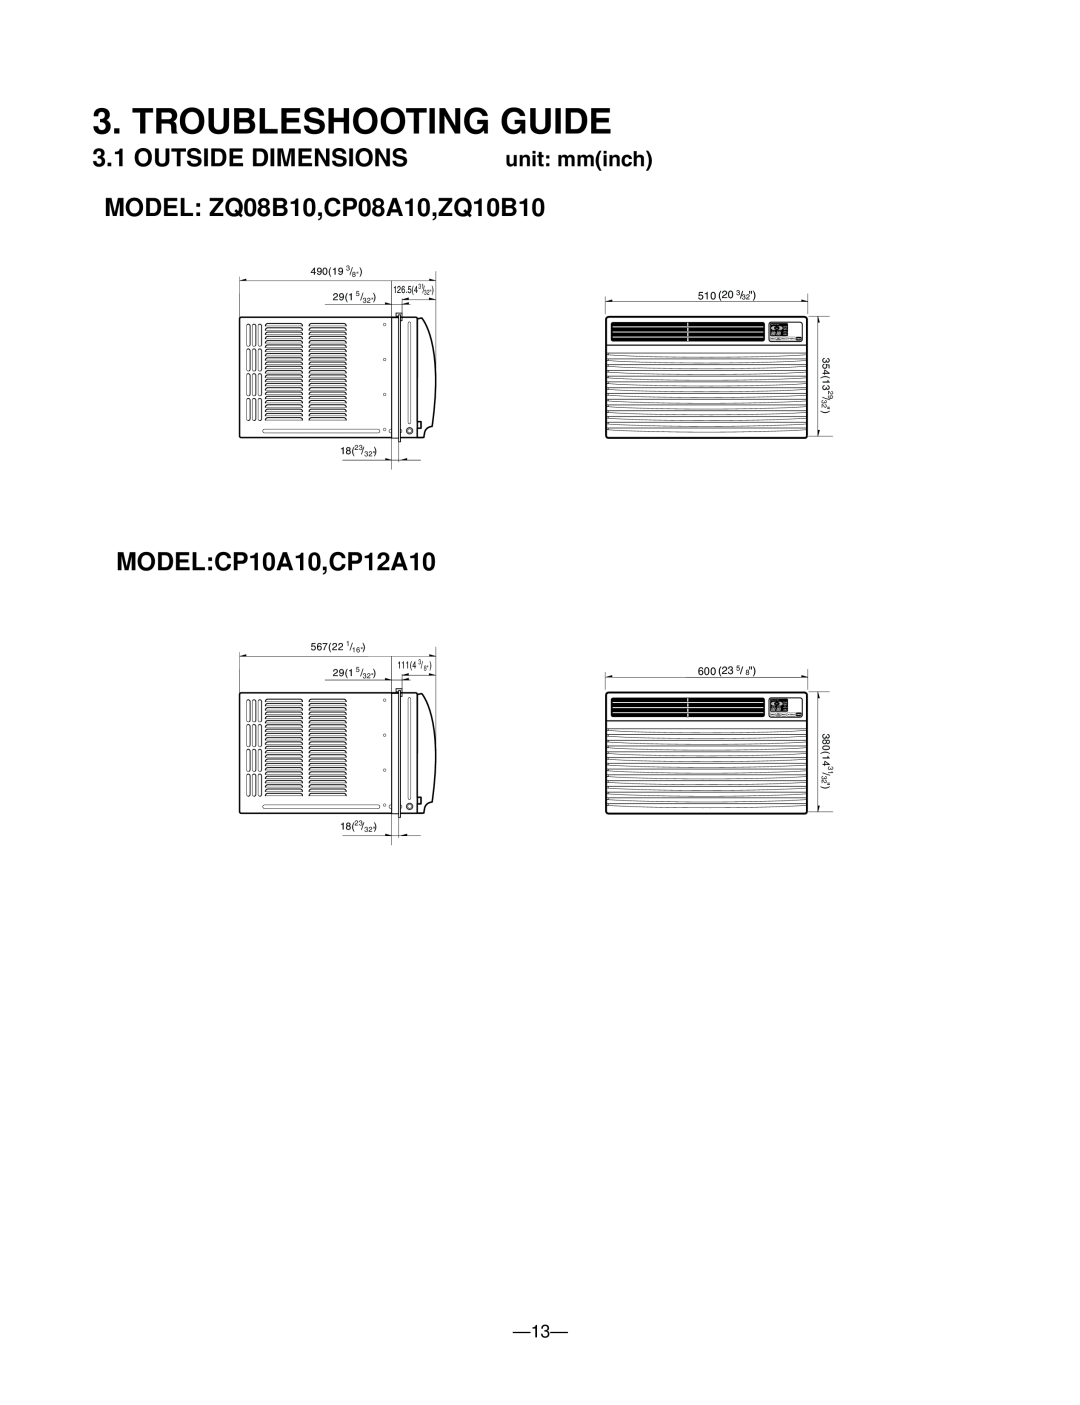 Friedrich Troubleshooting Guide, Outside Dimensions, MODEL ZQ08B10,CP08A10,ZQ10B10, MODEL CP10A10,CP12A10, unit mminch 